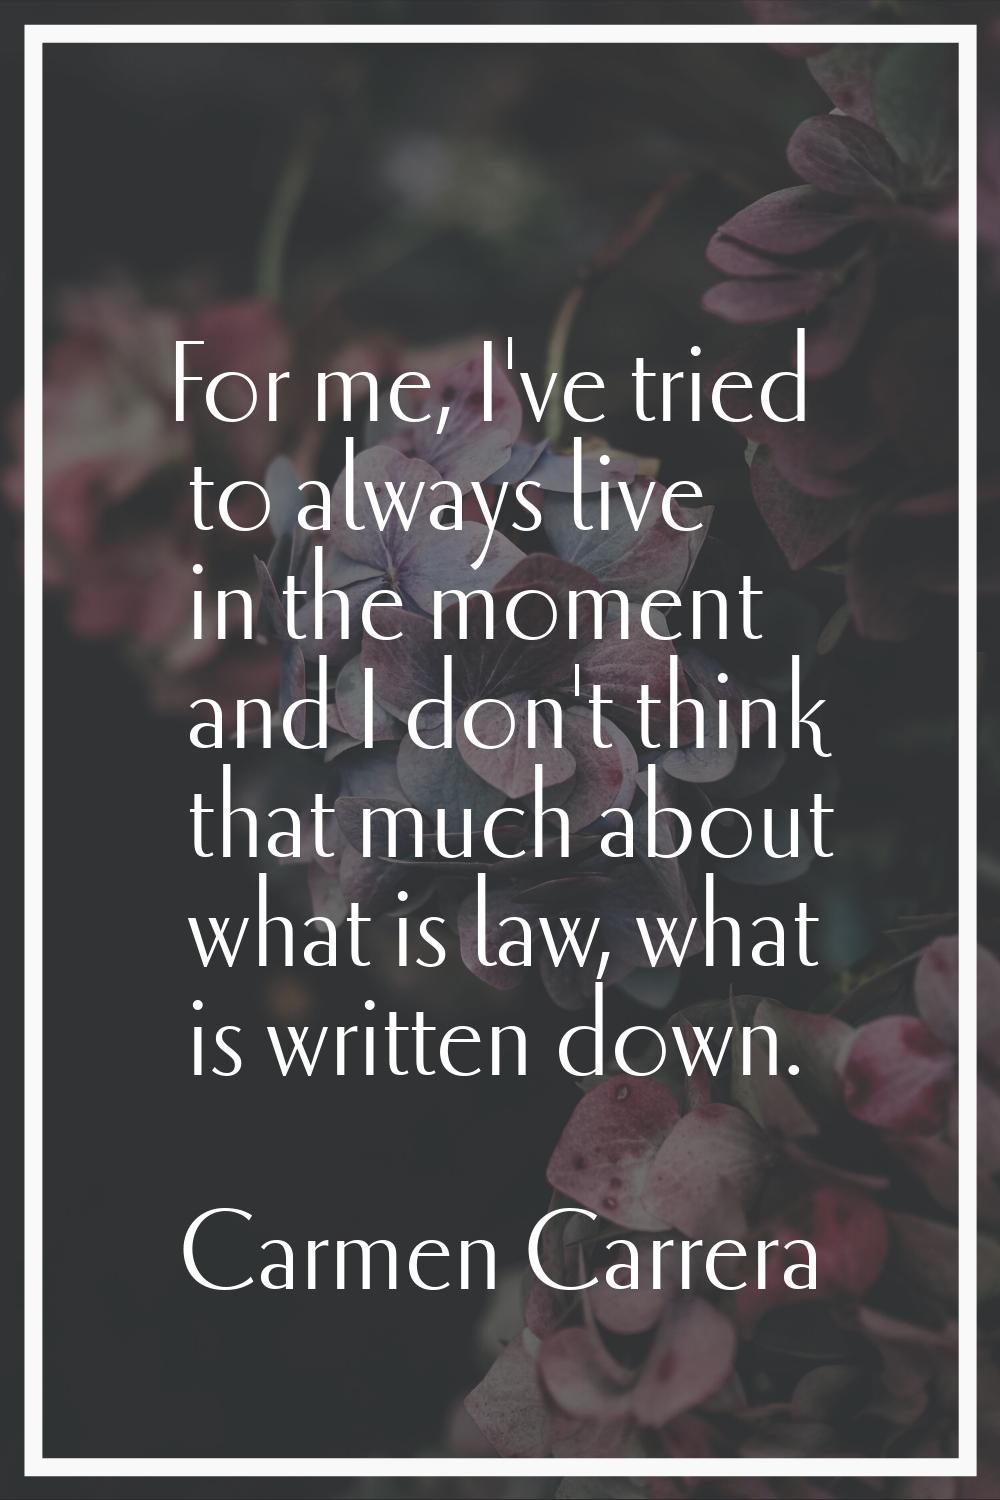 For me, I've tried to always live in the moment and I don't think that much about what is law, what